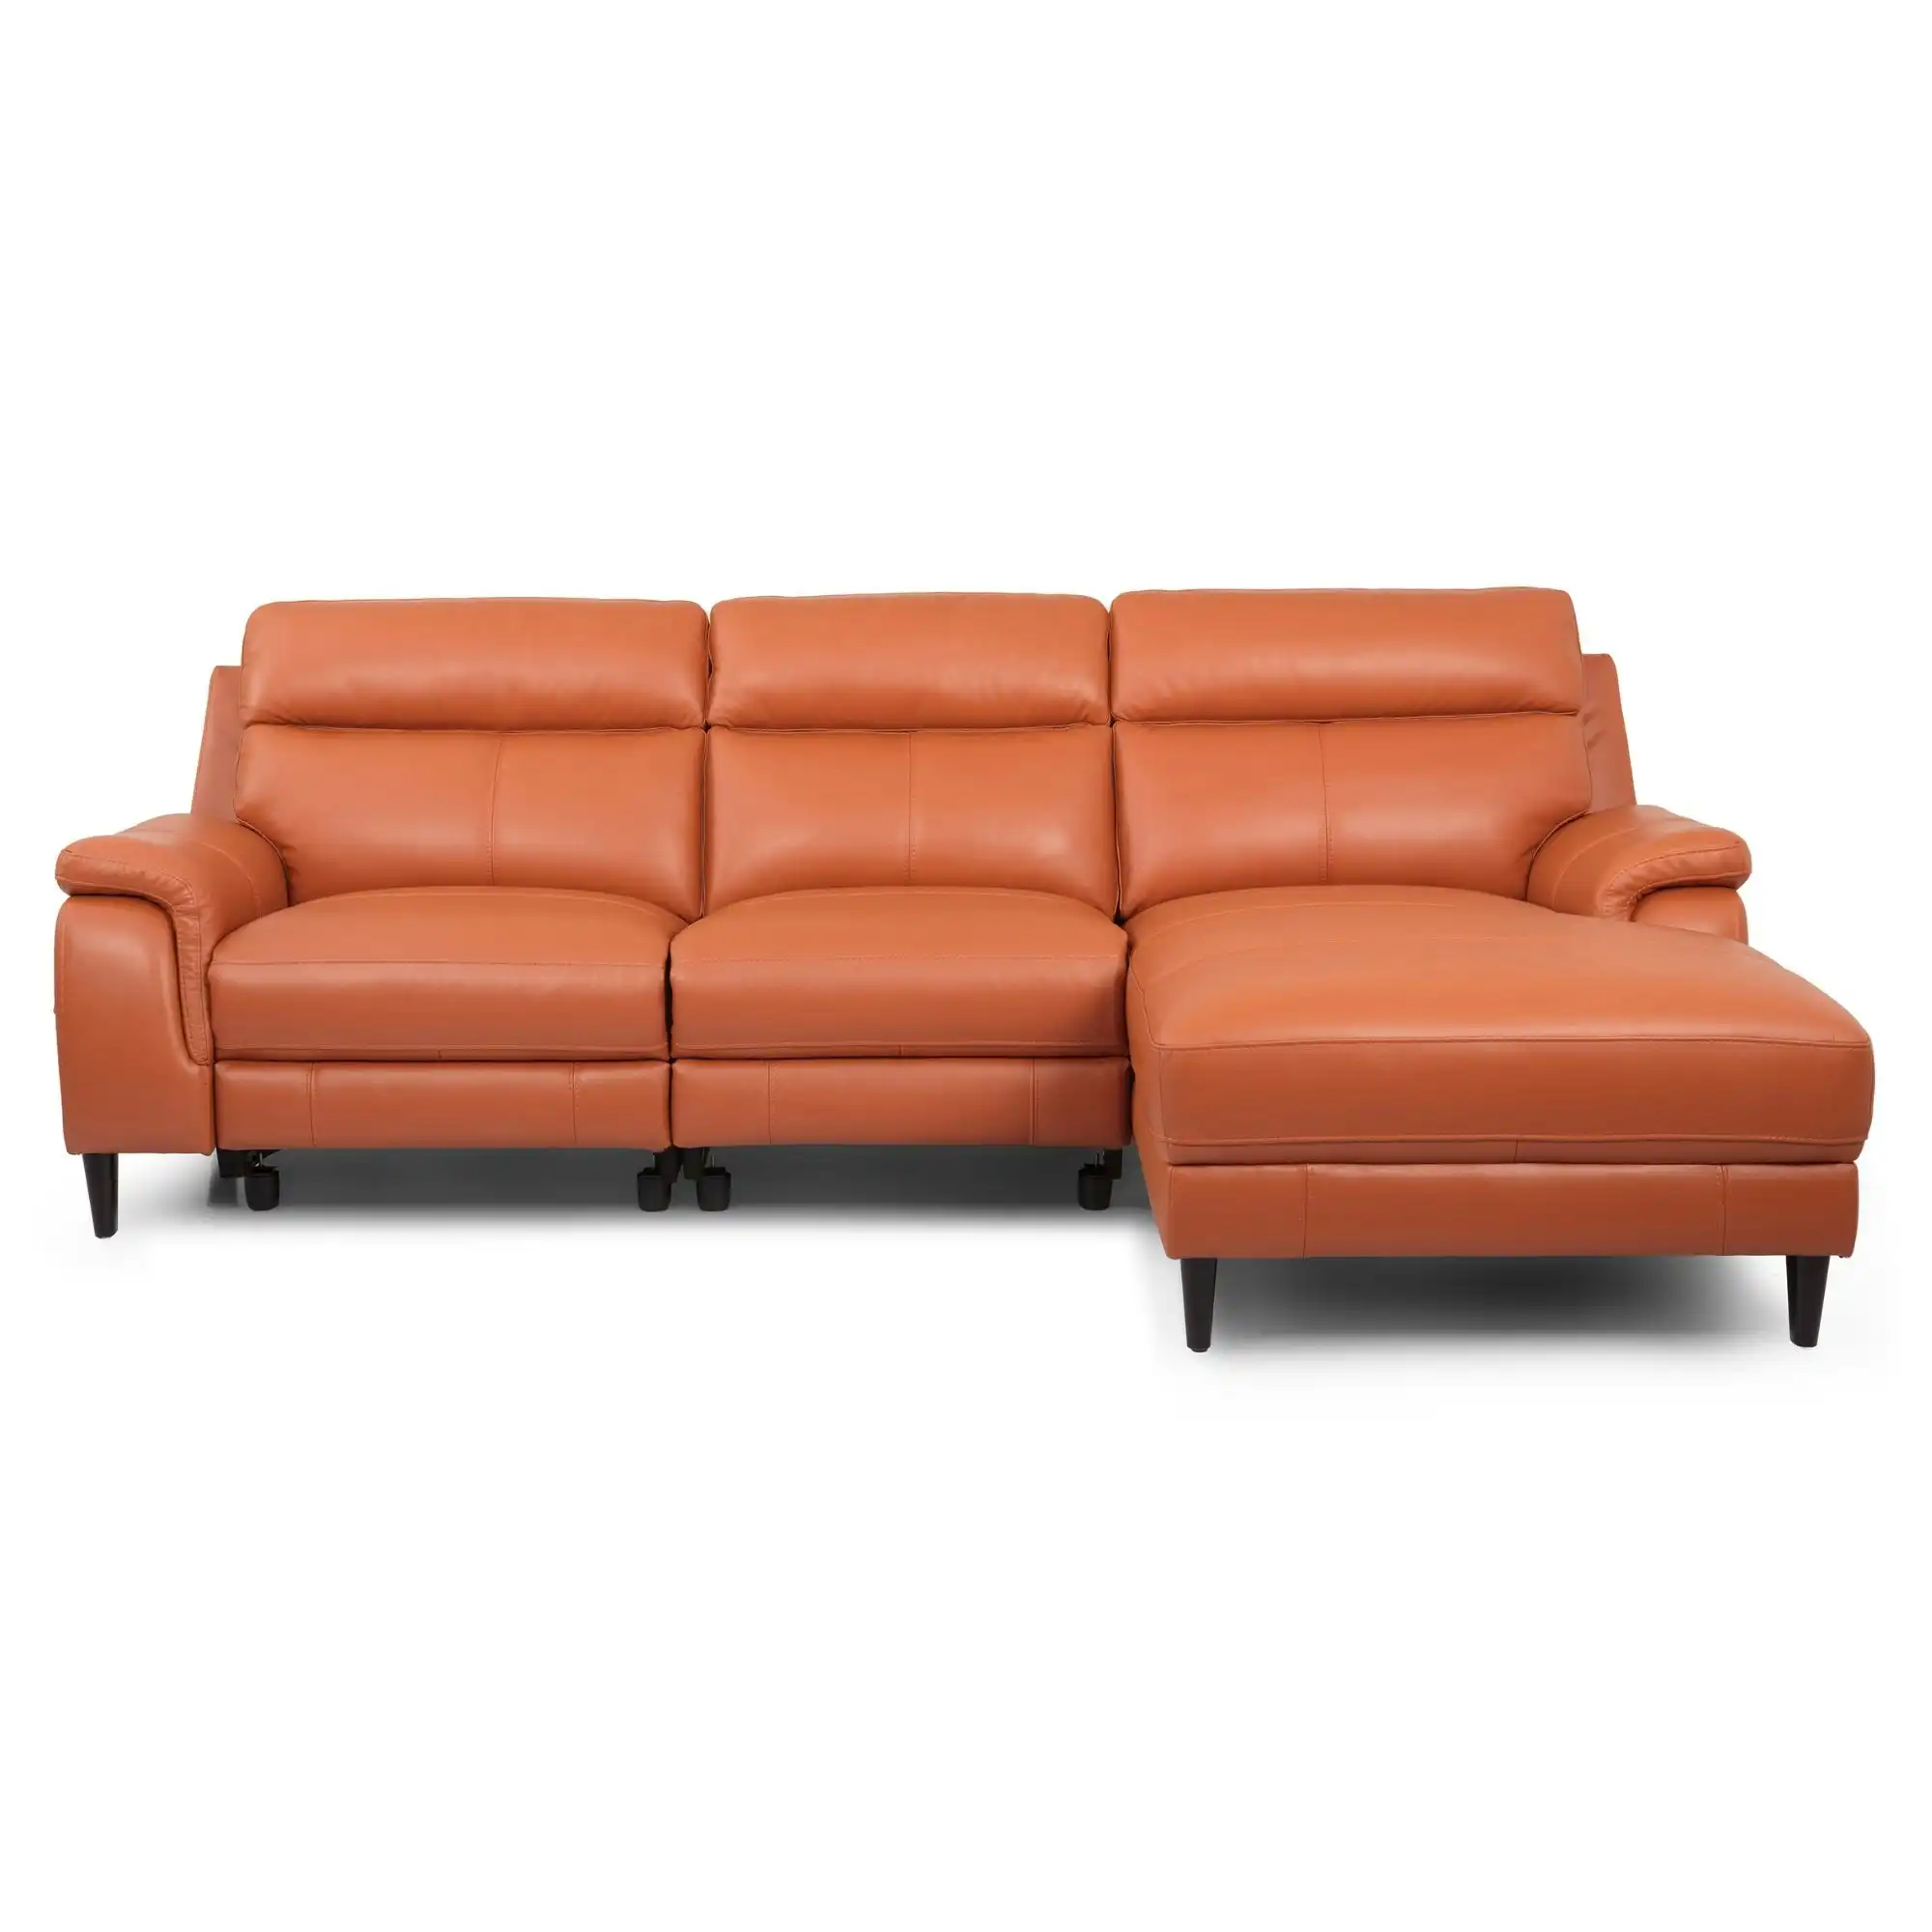 Ella 3 Seater Leather Electric Recliner Chaise Sofa